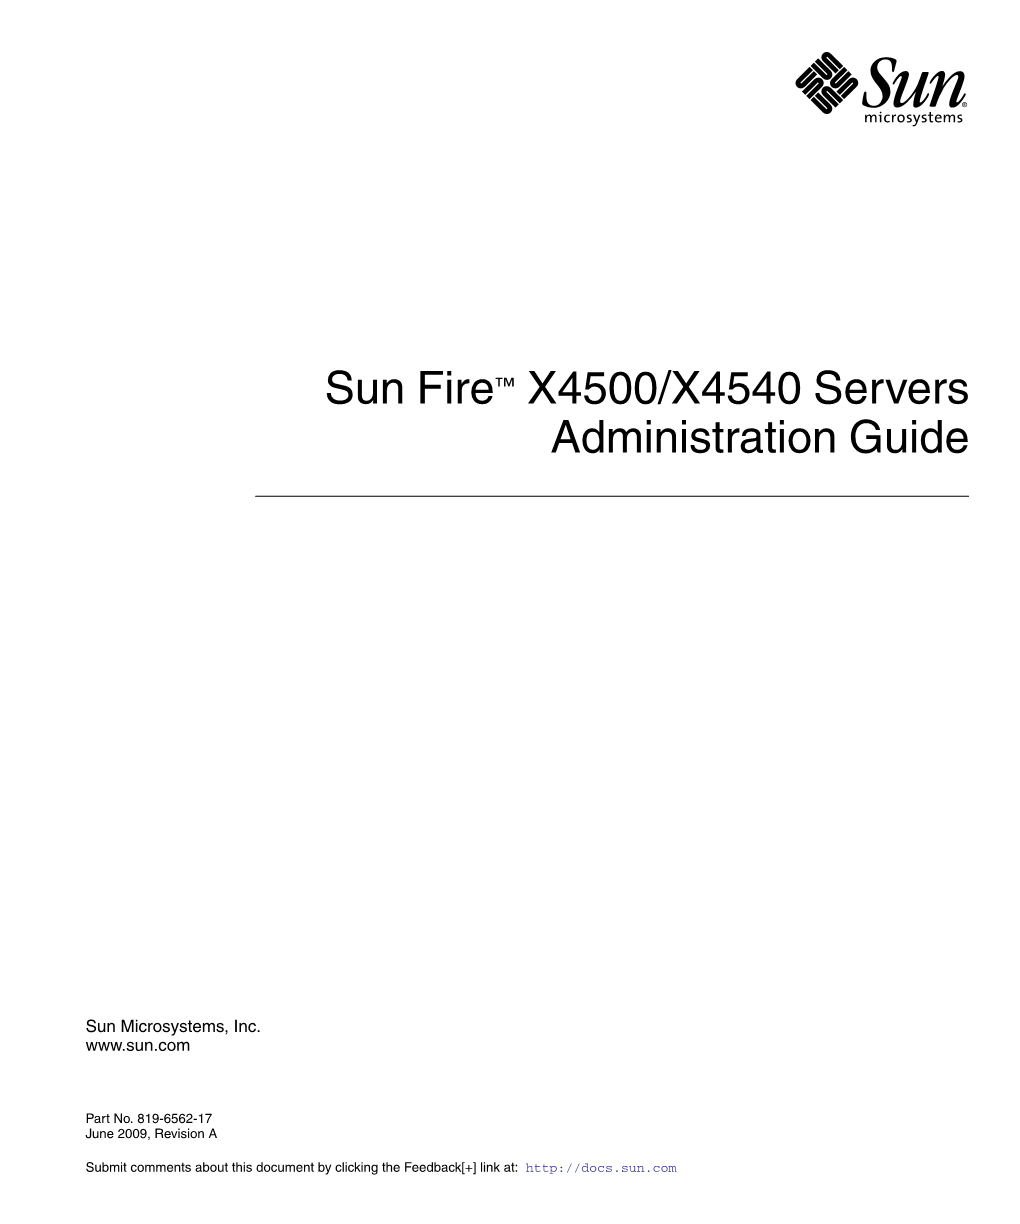 Sun Fire X4500/X4540 Servers Administration Guide, (819-6562-17)